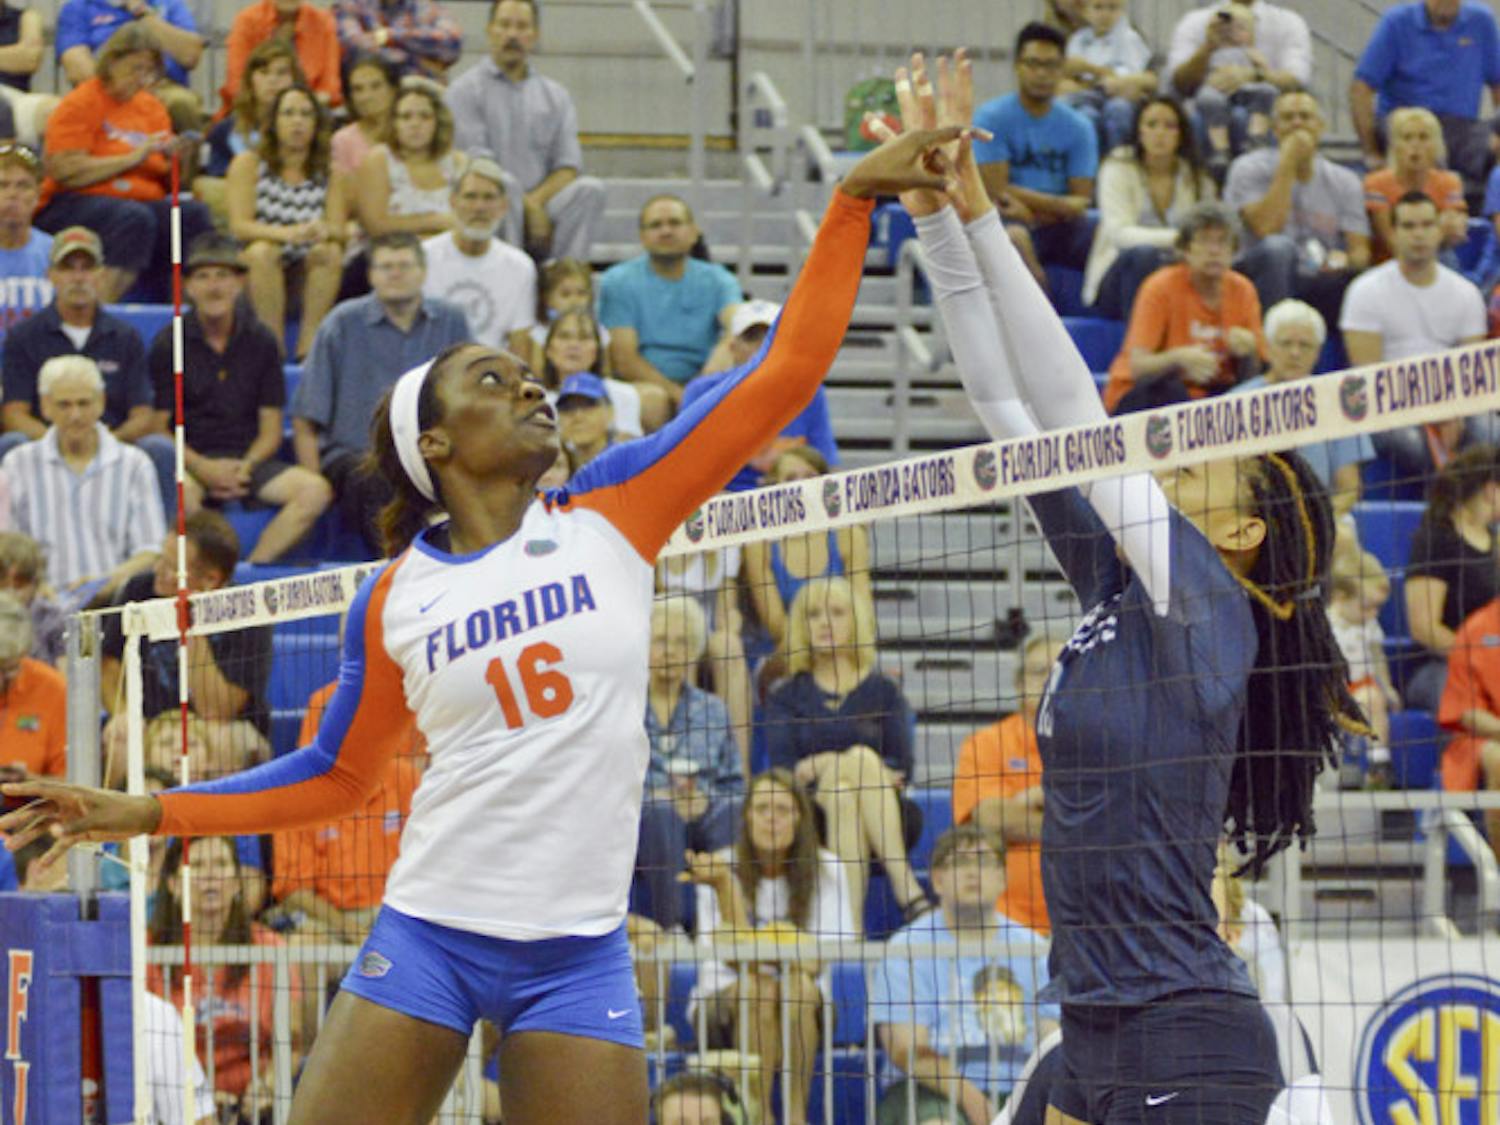 UF middle blocker Simone Antwi tips a ball over the net during Florida's 3-0 win against Ole Miss on Sept. 28, 2014, in the O'Connell Center.